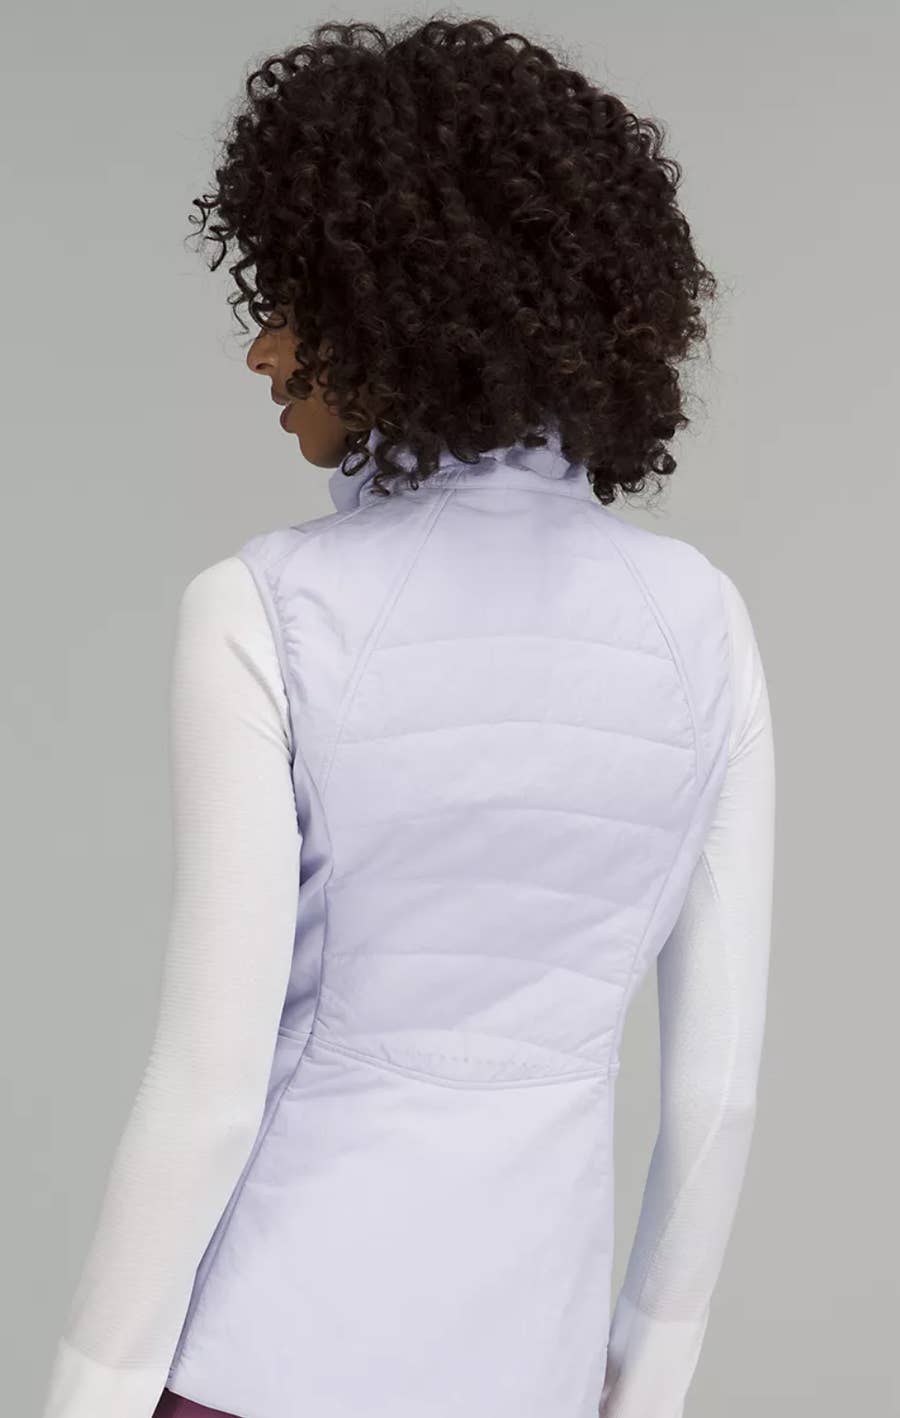 21 Best Lululemon Clothes And Accessories For Fall 2022